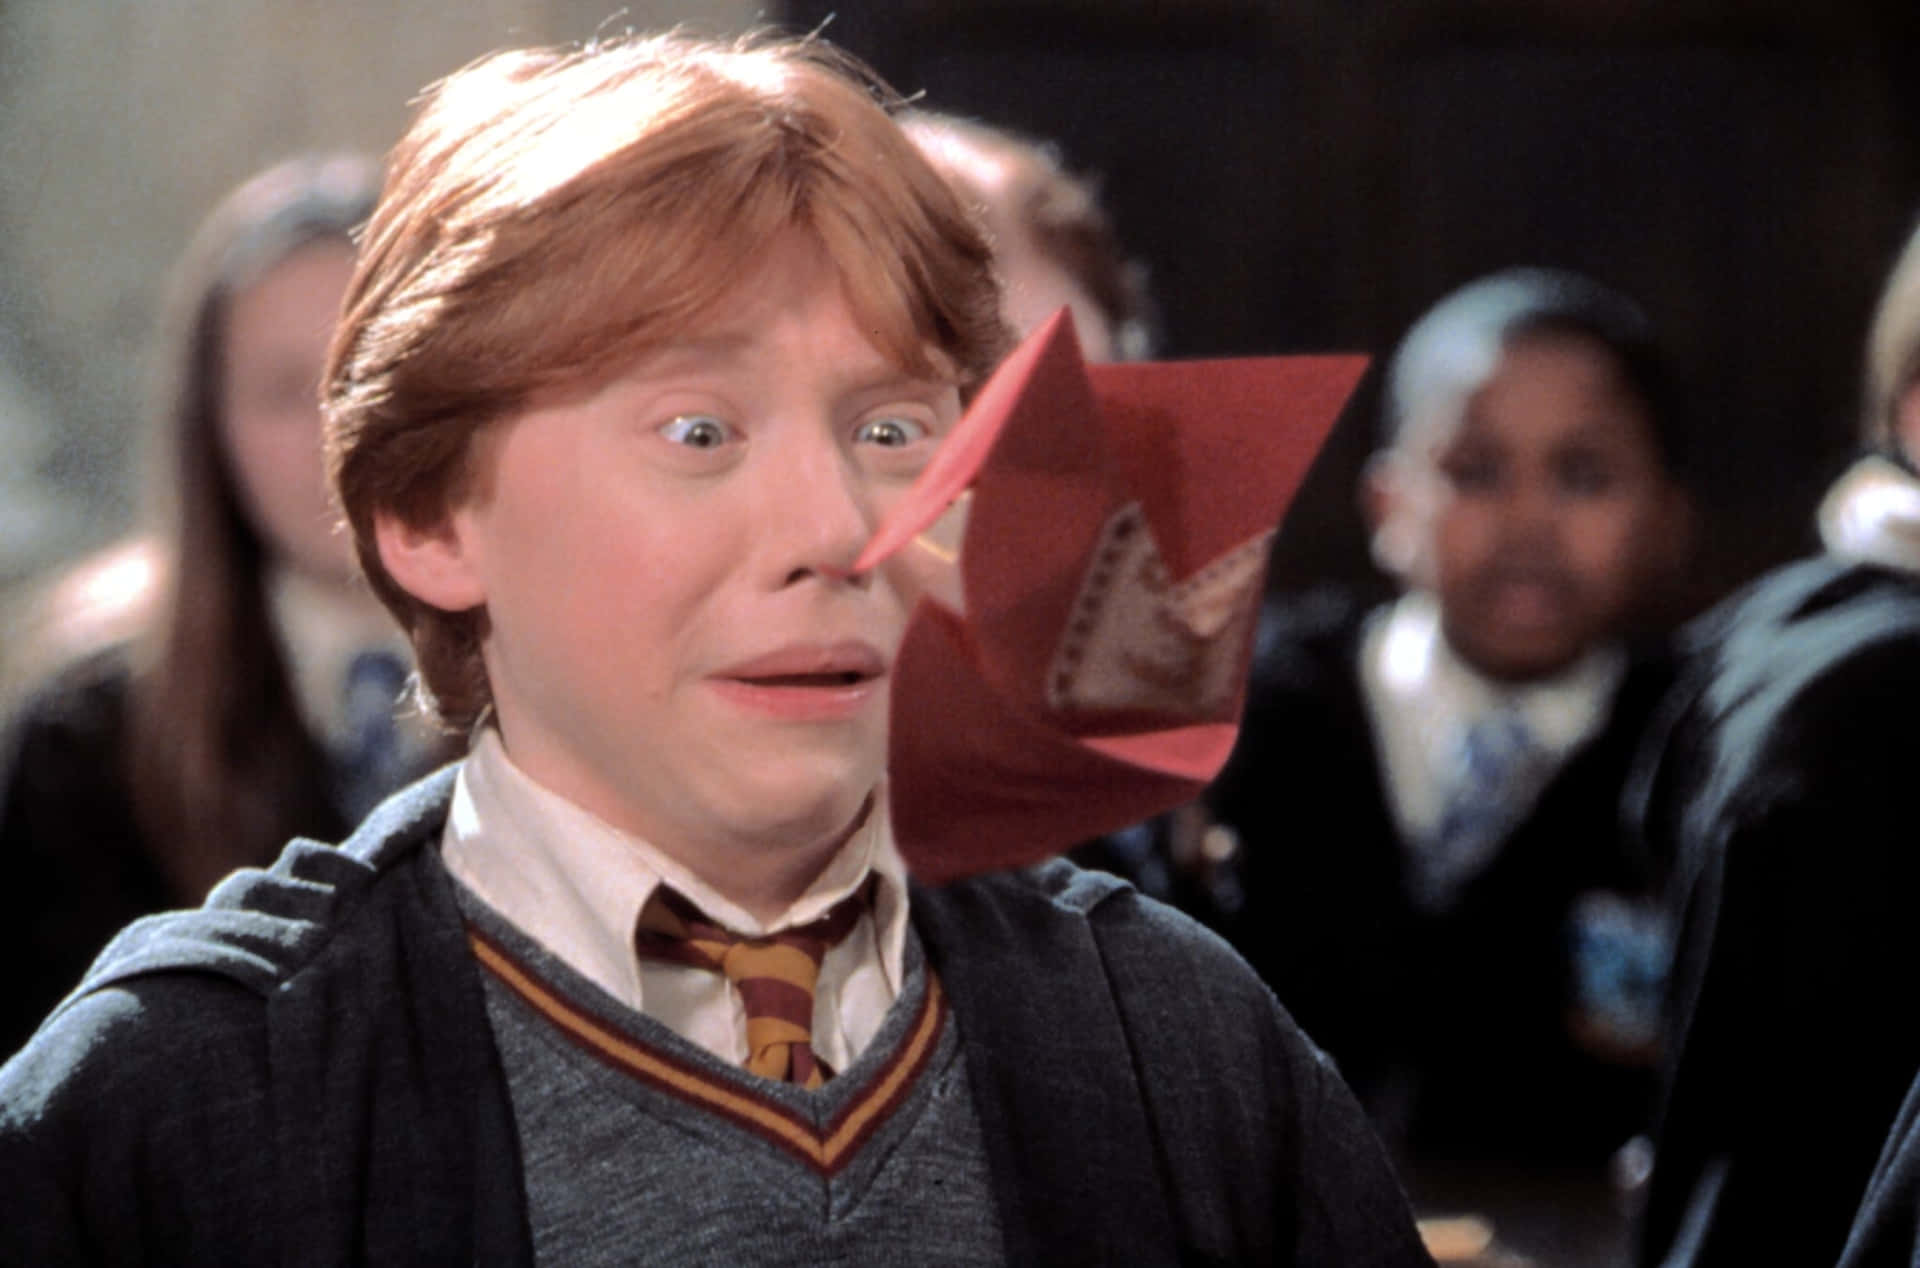 harry potter funny face